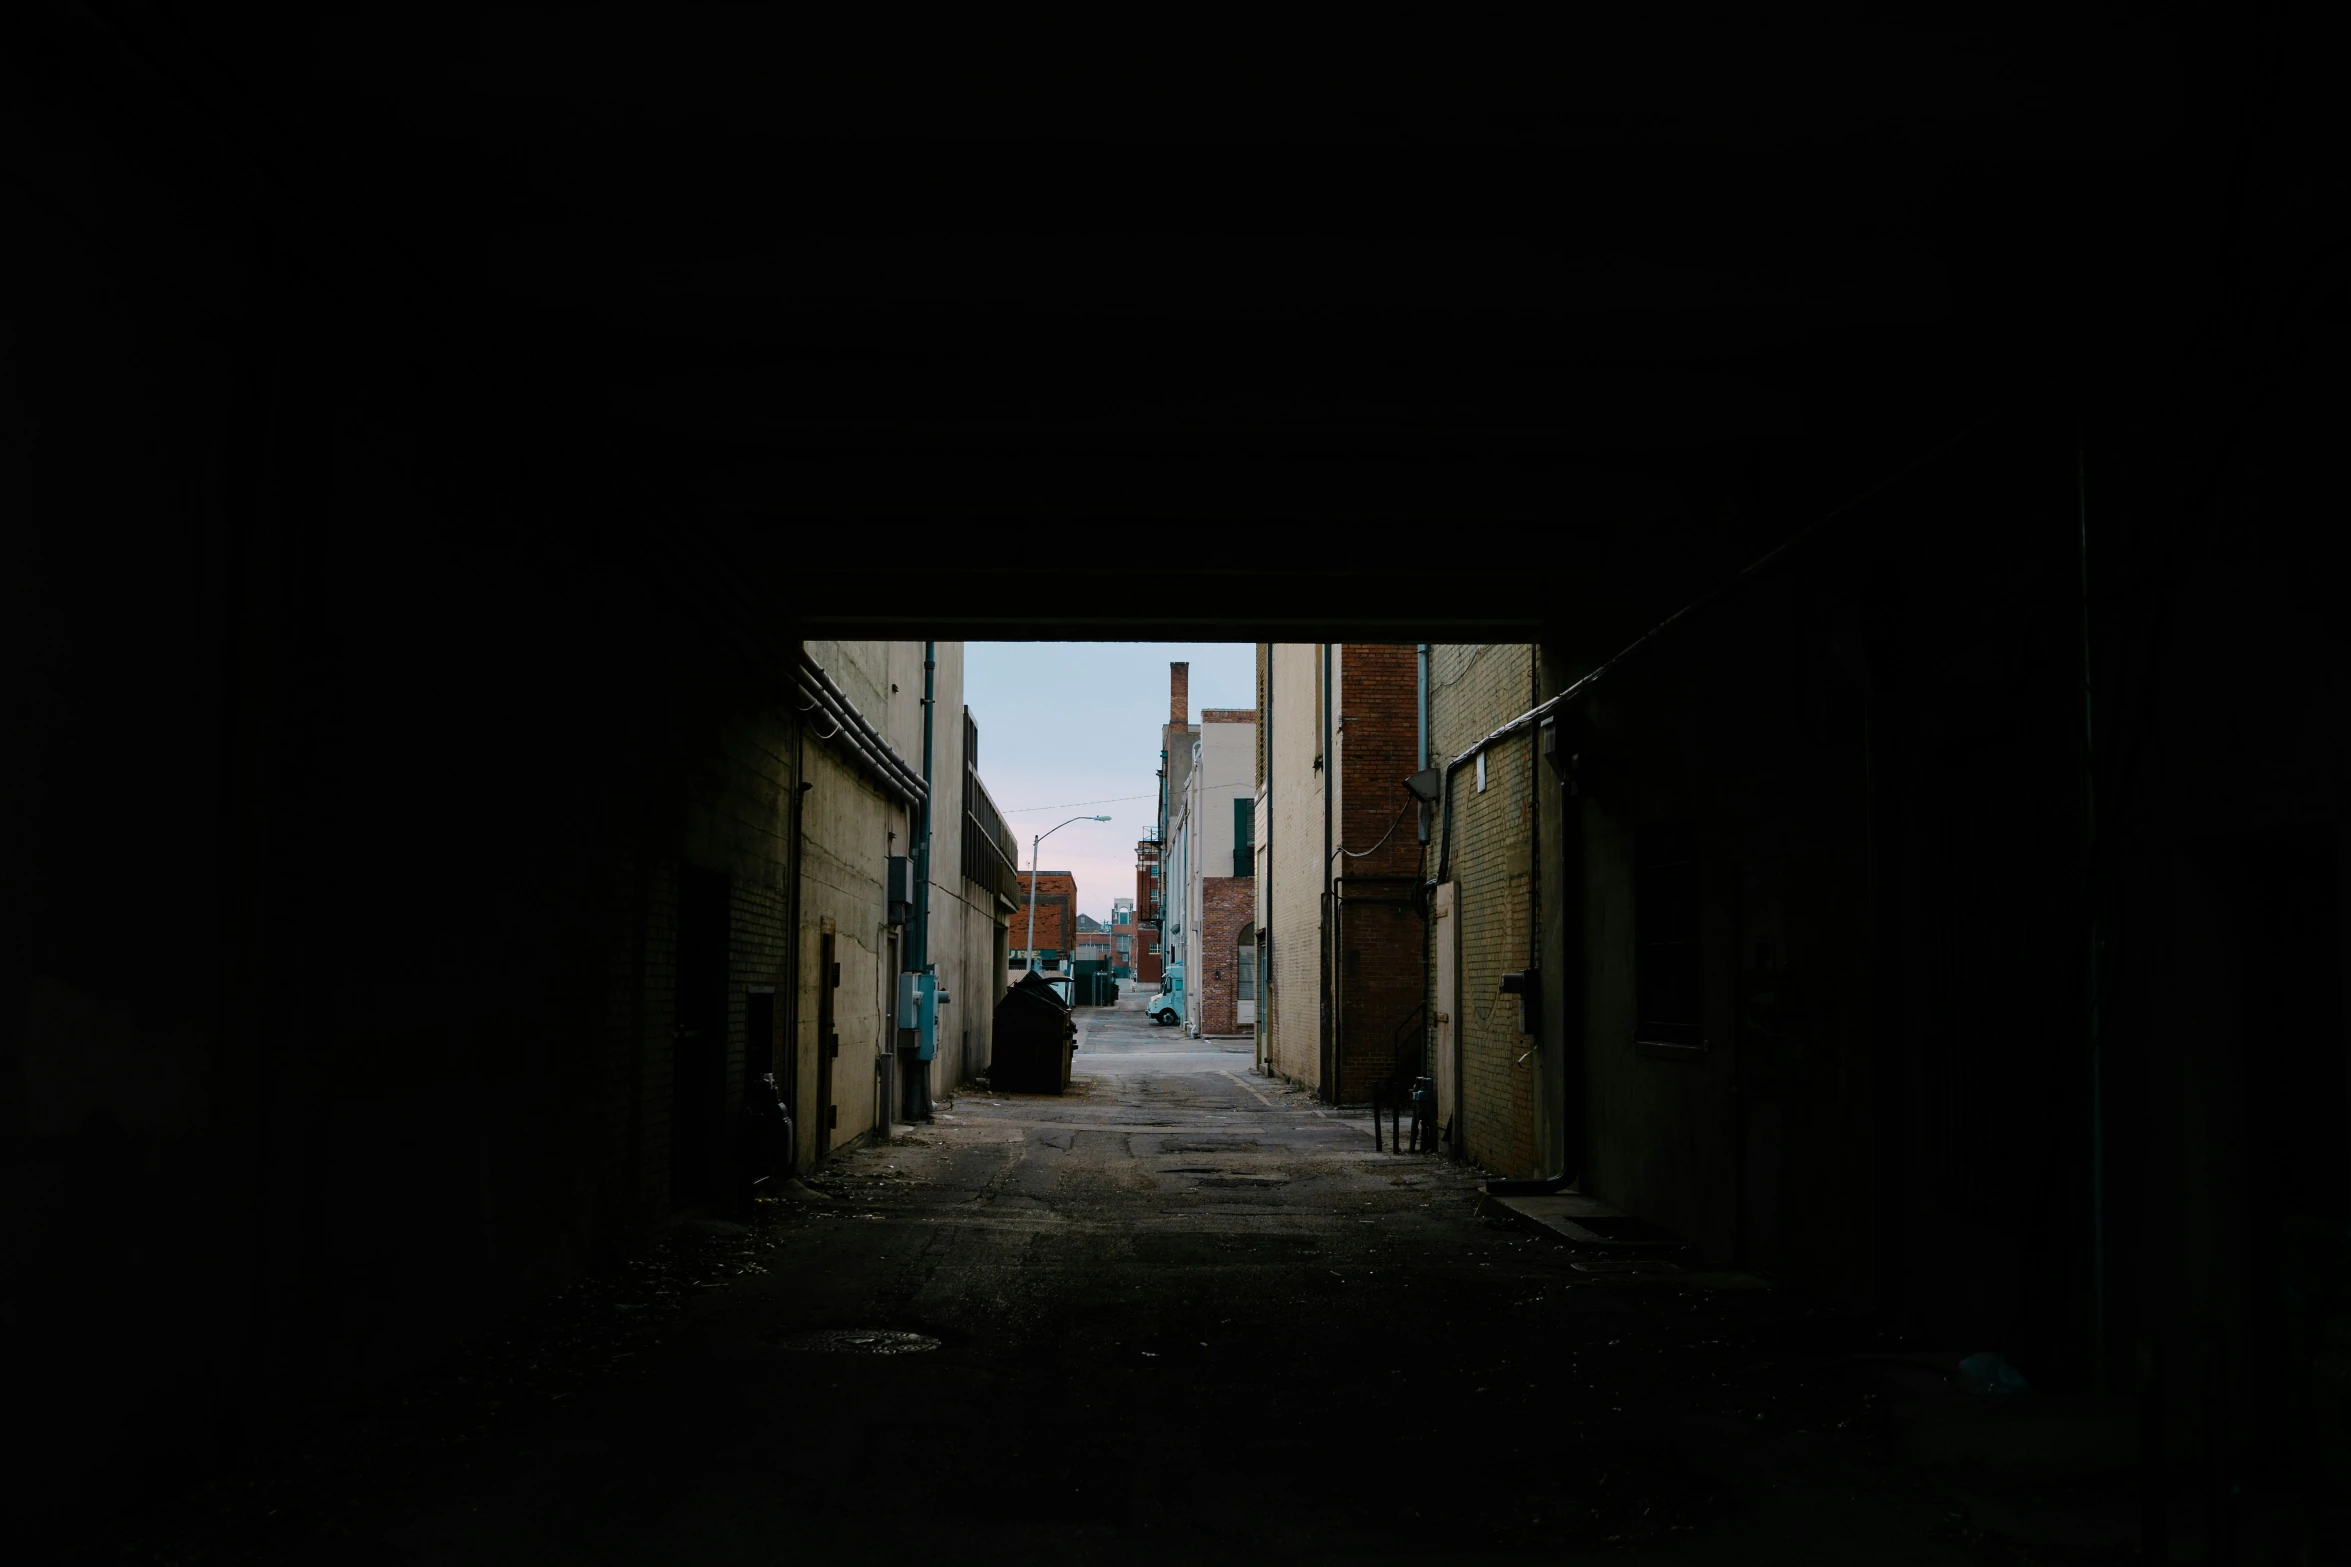 silhouette of person sitting on chair in dark alley